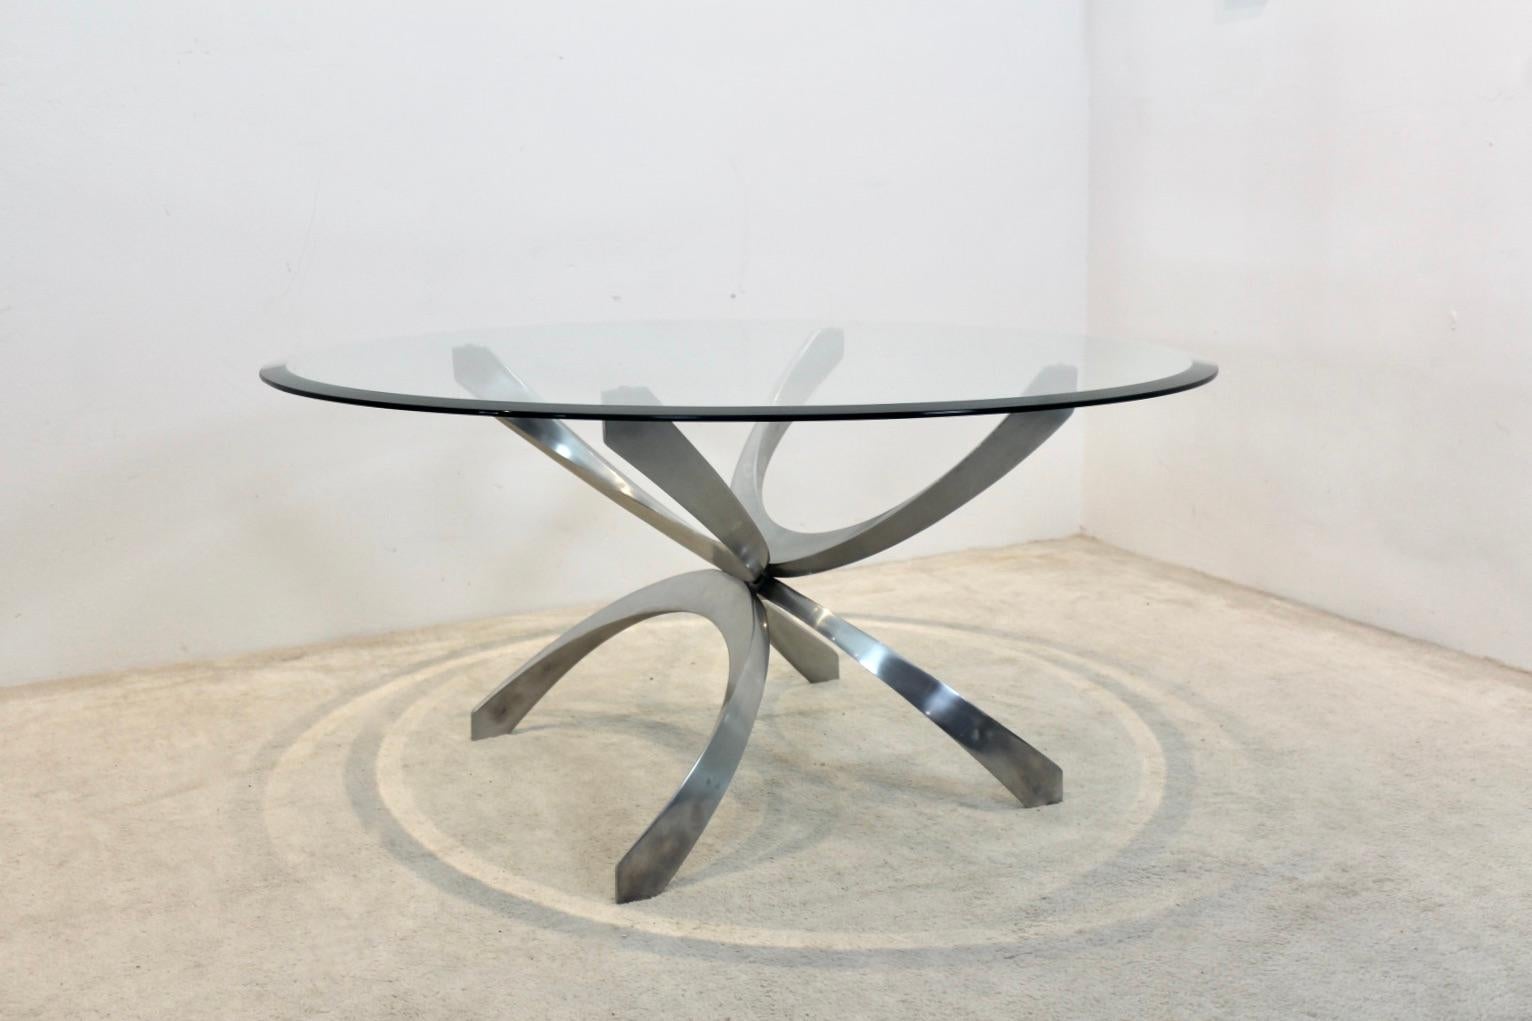 Modernist Sculptural Aluminum and Glass Coffee Table by Knut Hesterberg ...